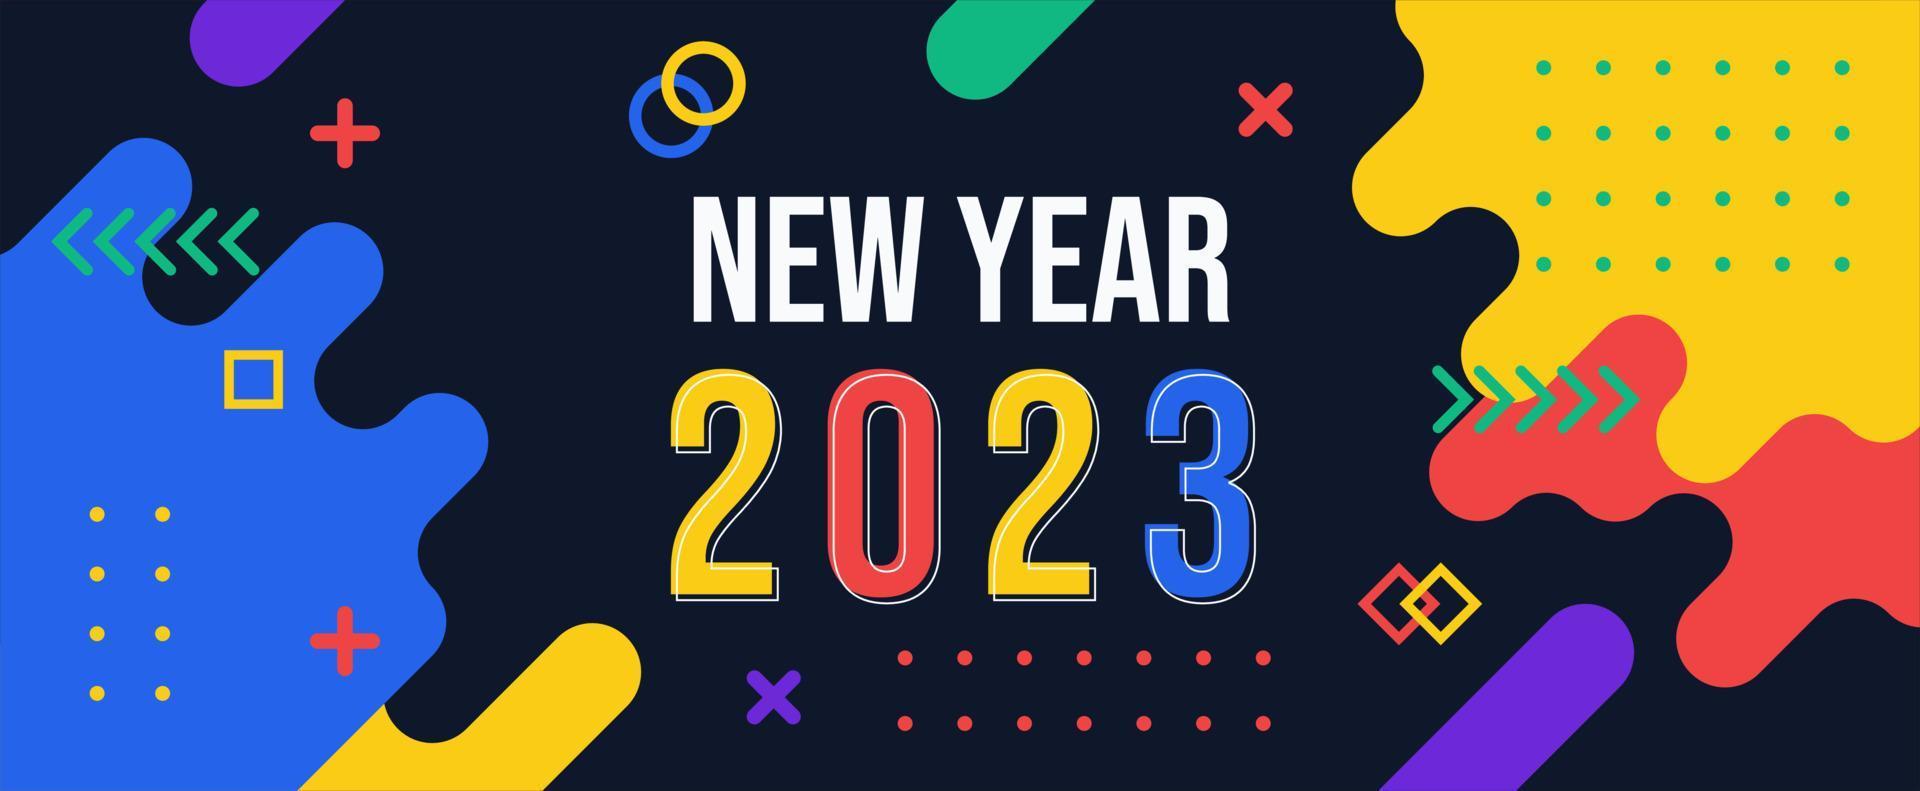 New Year 2023 Banner With Modern Geometric Abstract Background Happy New Year Greeting Card Design For Year 2023 Free Vector